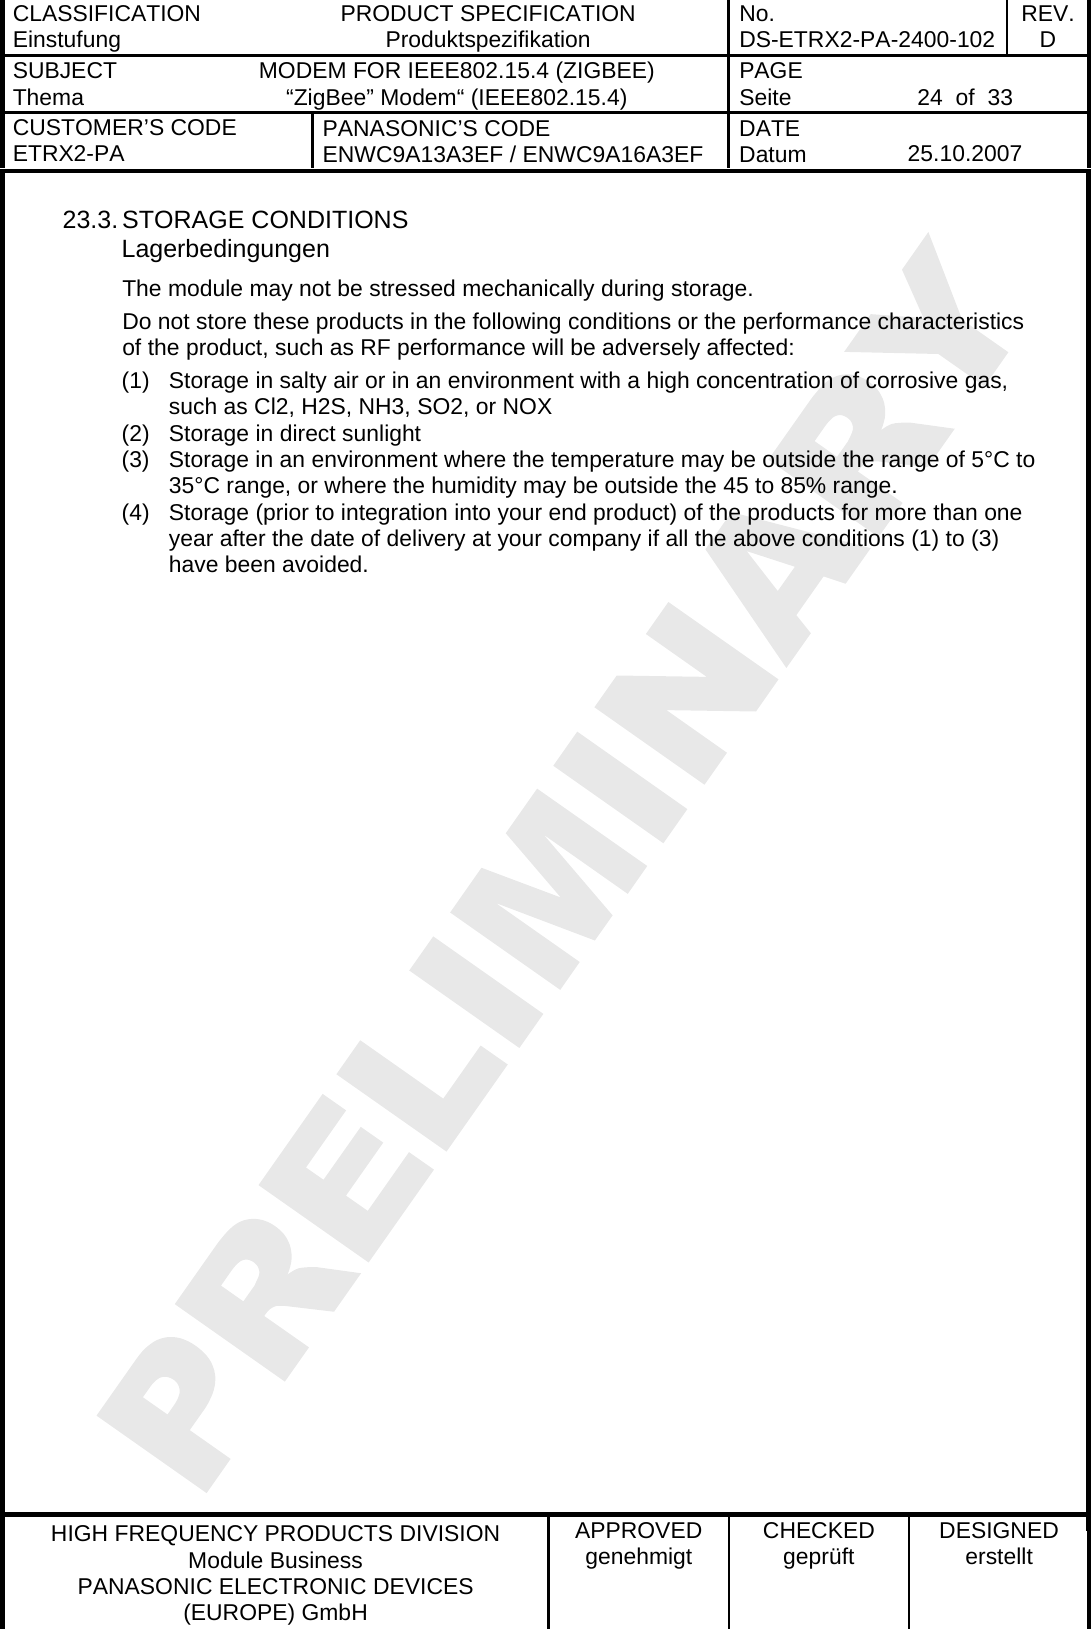 CLASSIFICATION Einstufung  PRODUCT SPECIFICATION Produktspezifikation  No. DS-ETRX2-PA-2400-102 REV.D SUBJECT Thema  MODEM FOR IEEE802.15.4 (ZIGBEE) “ZigBee” Modem“ (IEEE802.15.4)    PAGE Seite   24  of  33 CUSTOMER’S CODE ETRX2-PA  PANASONIC’S CODE ENWC9A13A3EF / ENWC9A16A3EF  DATE Datum   25.10.2007   HIGH FREQUENCY PRODUCTS DIVISION Module Business PANASONIC ELECTRONIC DEVICES  (EUROPE) GmbH APPROVED genehmigt  CHECKED geprüft  DESIGNED erstellt 23.3. STORAGE CONDITIONS Lagerbedingungen The module may not be stressed mechanically during storage. Do not store these products in the following conditions or the performance characteristics of the product, such as RF performance will be adversely affected: (1)  Storage in salty air or in an environment with a high concentration of corrosive gas, such as Cl2, H2S, NH3, SO2, or NOX (2)  Storage in direct sunlight (3)  Storage in an environment where the temperature may be outside the range of 5°C to 35°C range, or where the humidity may be outside the 45 to 85% range. (4)  Storage (prior to integration into your end product) of the products for more than one year after the date of delivery at your company if all the above conditions (1) to (3) have been avoided.    